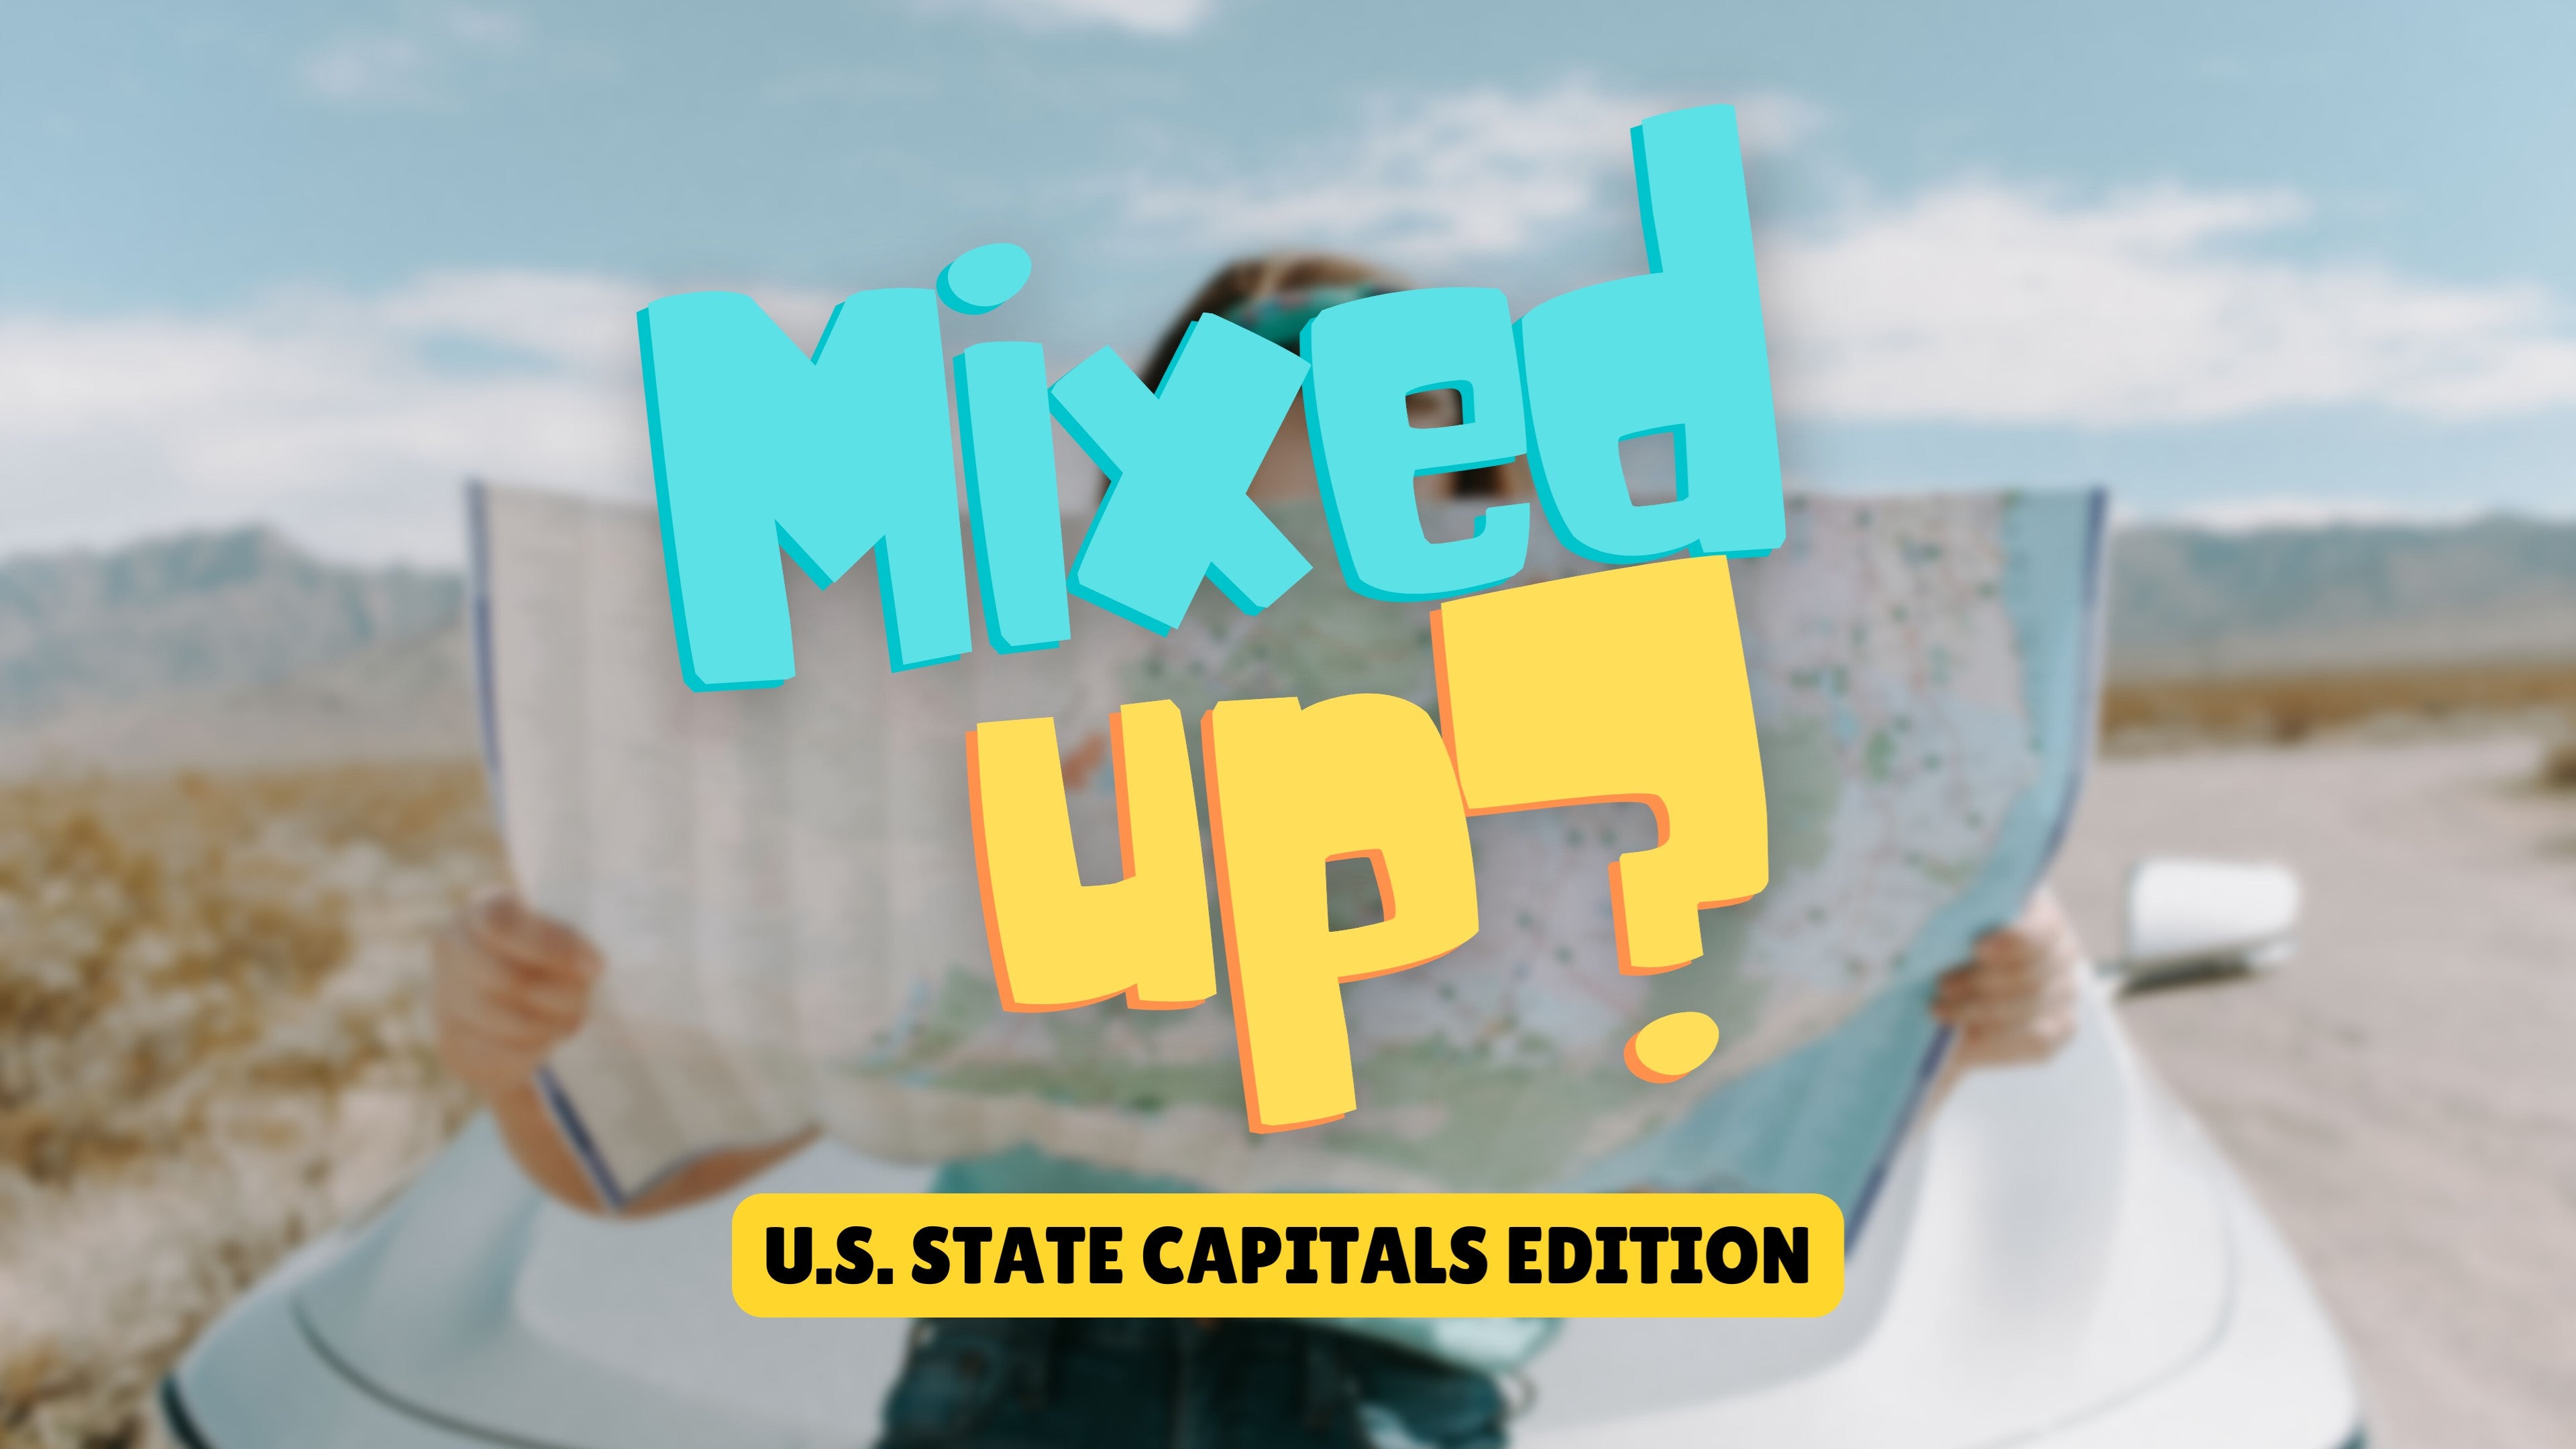 Mixed Up: US State Capitals